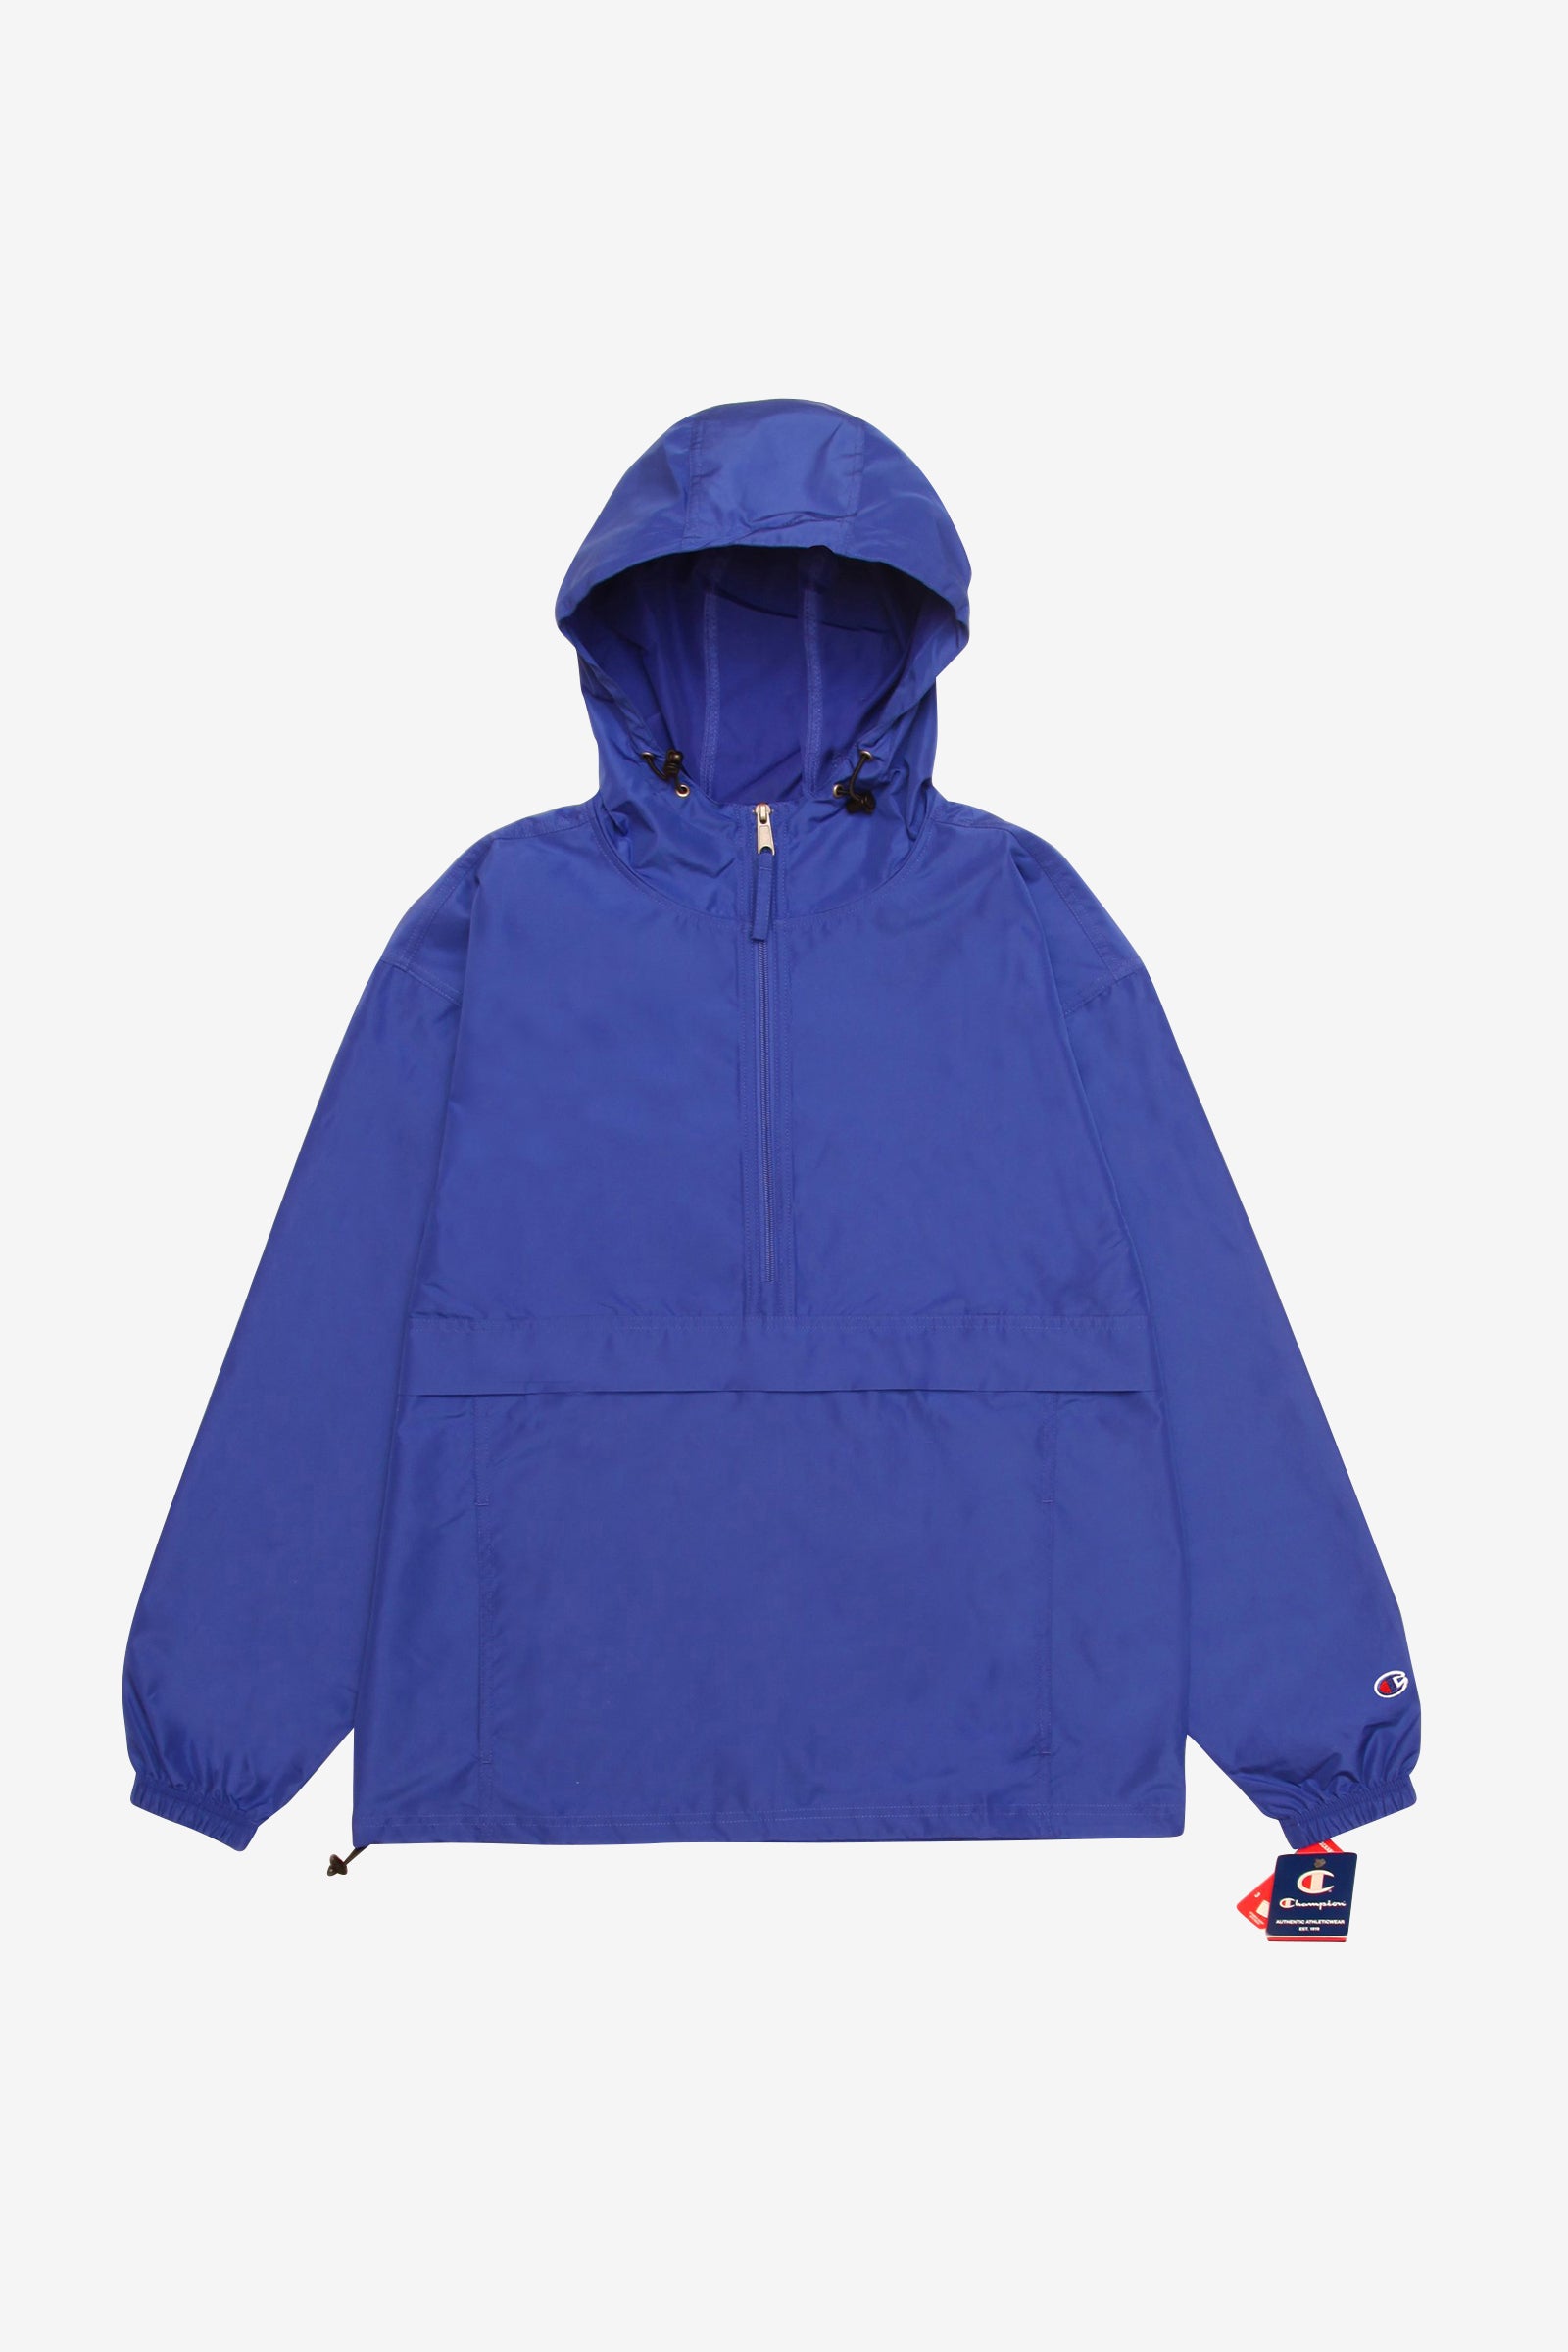 Champion - Packable Hooded Anorak Jacket - Royal